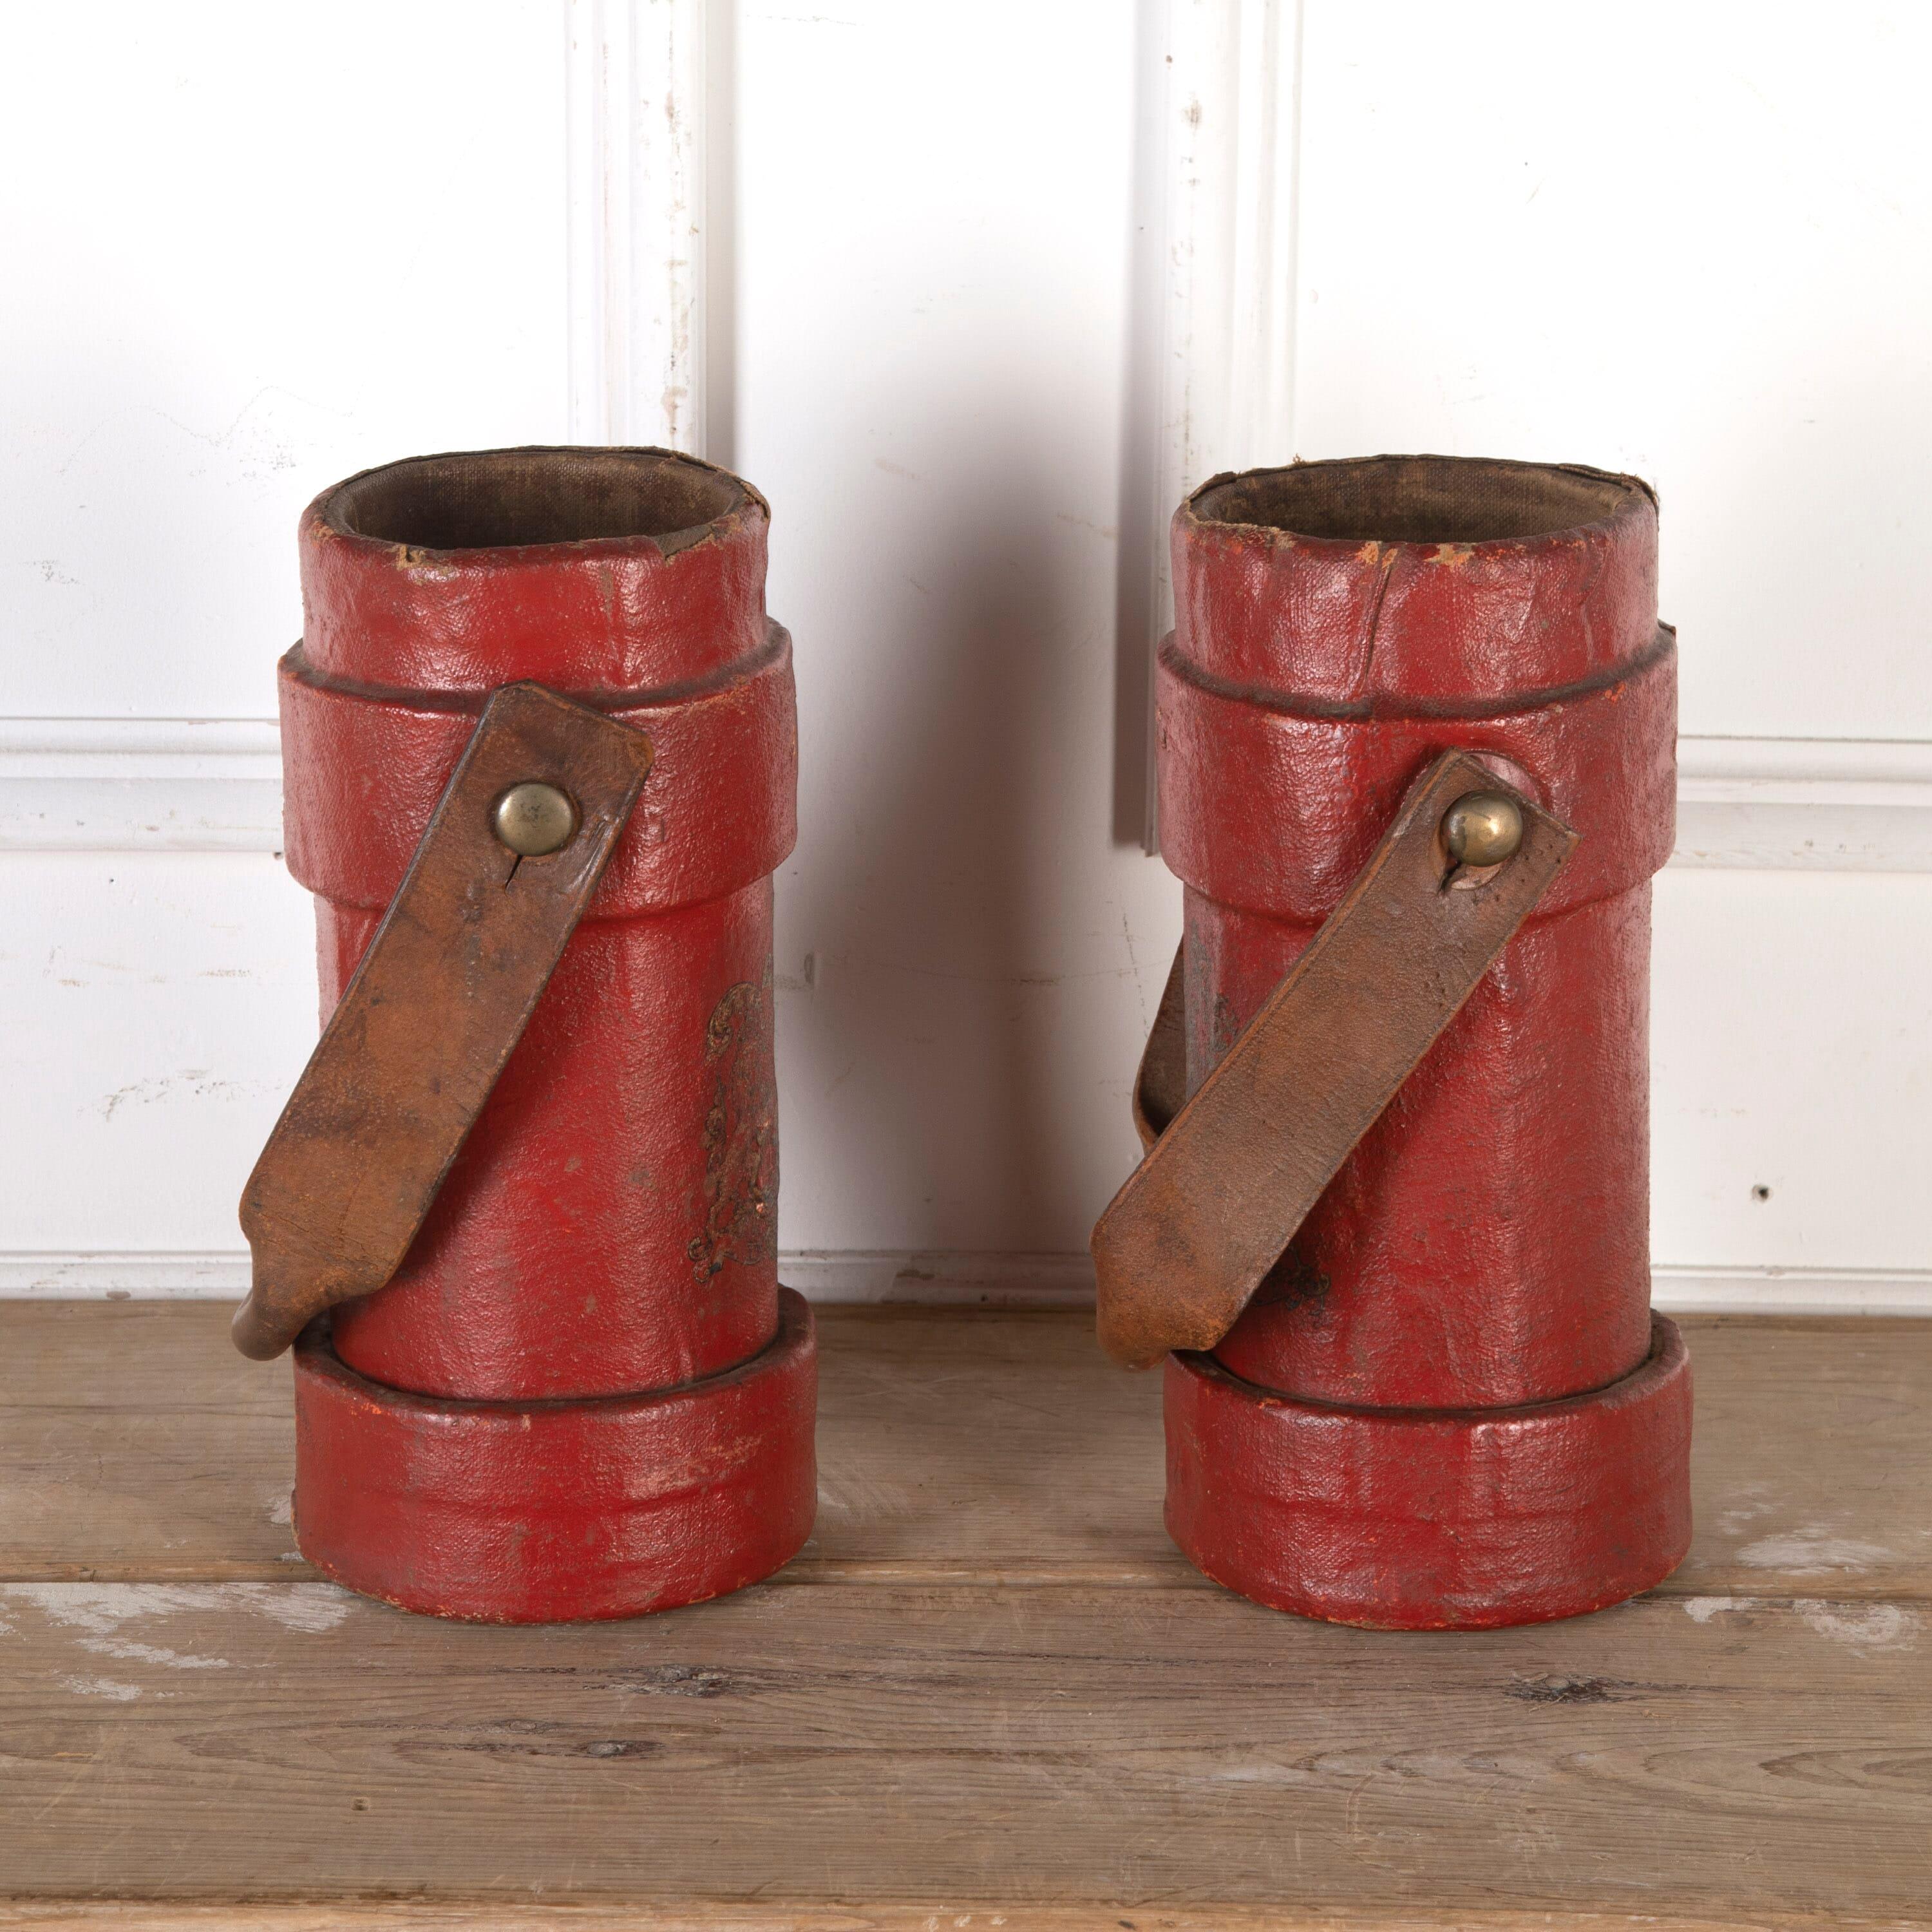 Pair of original red leather military cordite carrier cases, circa 1900. 

These objects are increasingly rare. They were used by the military prior as well as during WW1. These cases are made from leather and cork canvas and retain their original